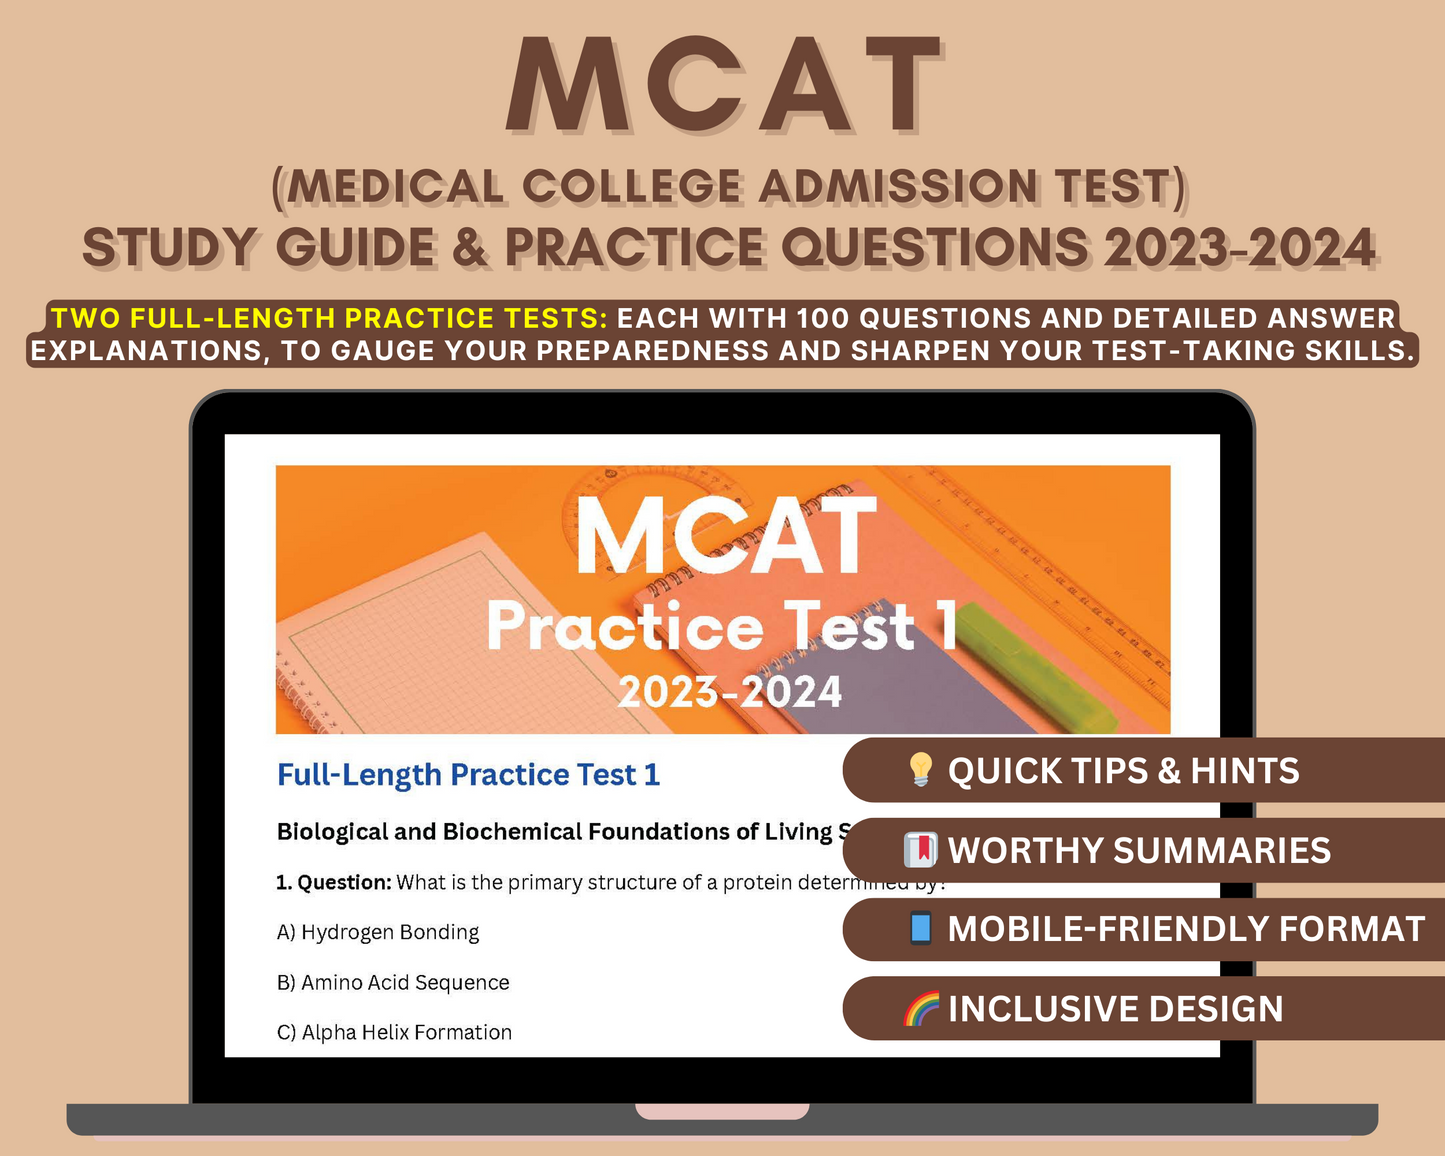 MCAT Study Guide 2023-2024: In-Depth Content Review, Practice Tests & Strategies for Medical College Admission Test | Medical School Entrance